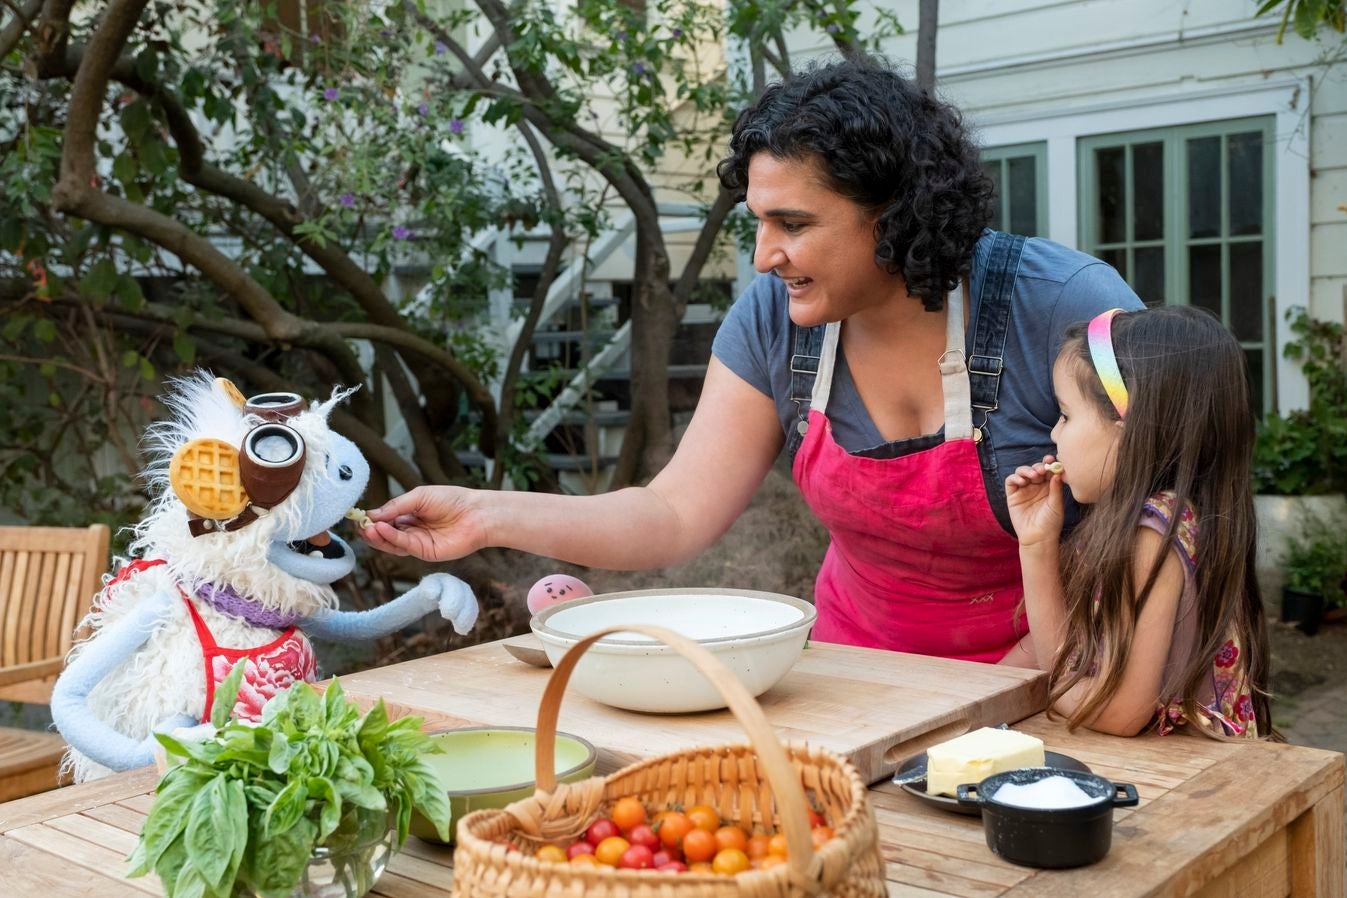 Nosrat feeds Waffles the puppet at an outdoor table as Mochi and a human child look on